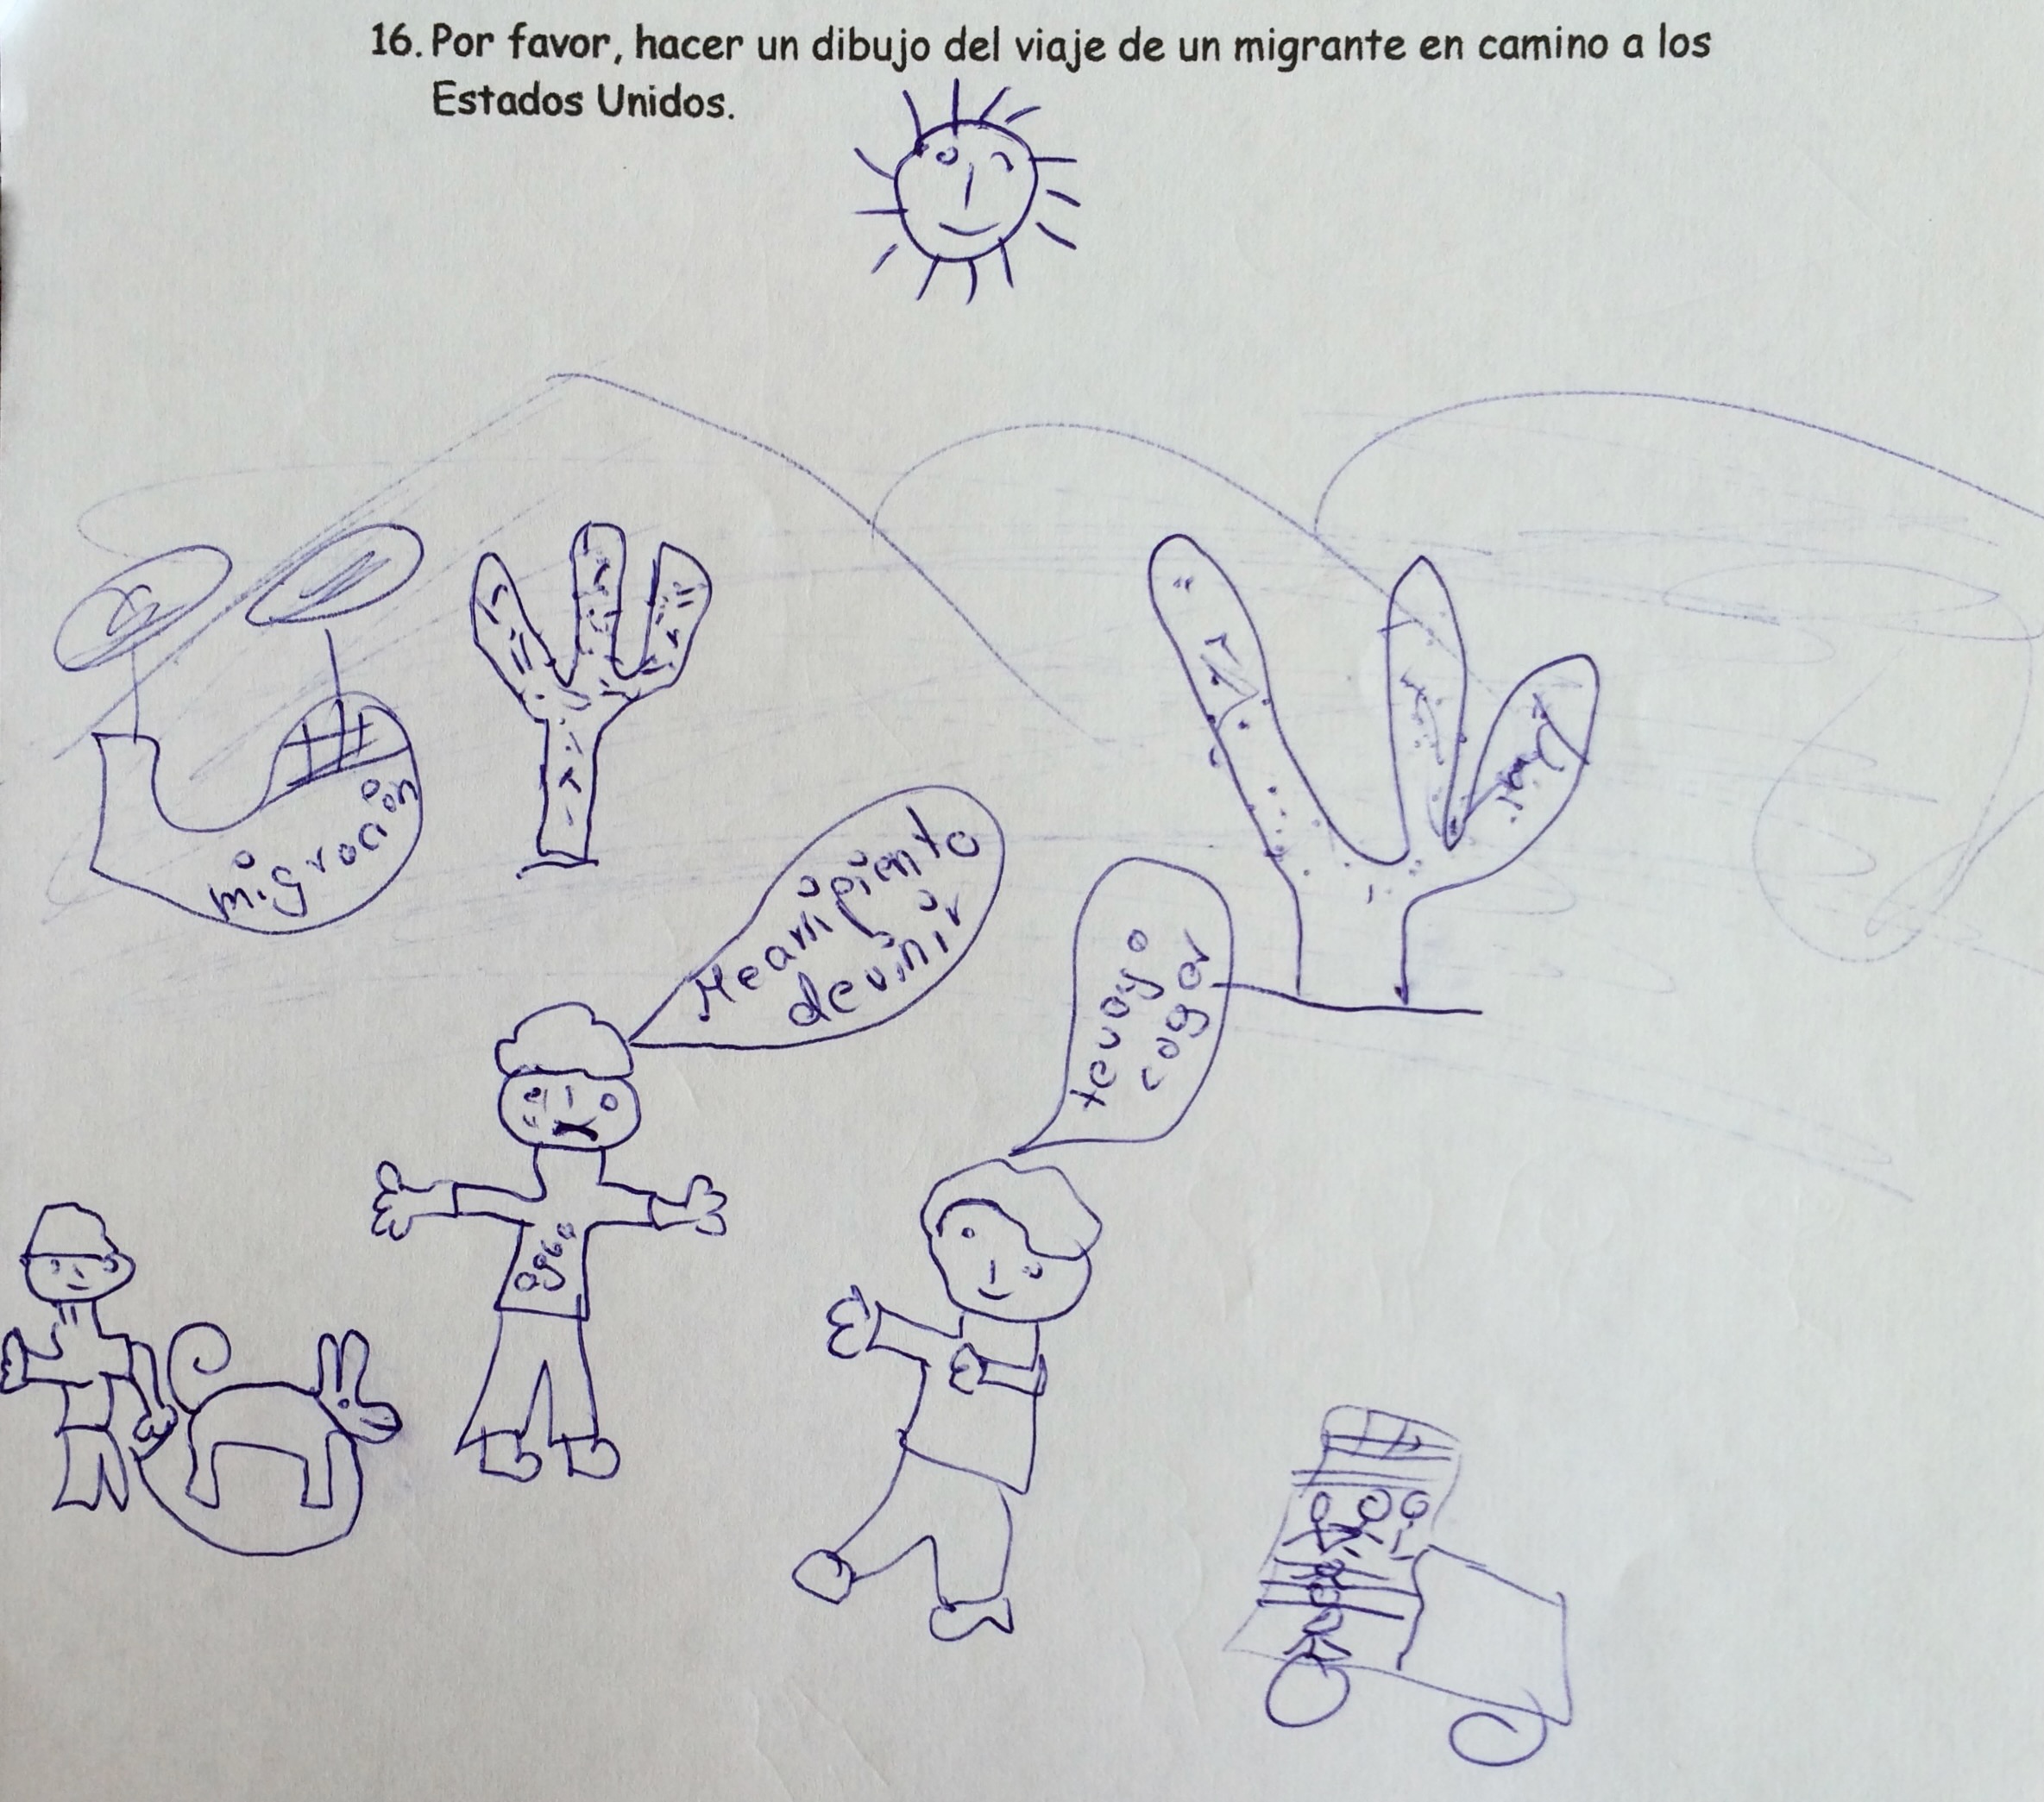 A child’s perspective on the migrant journey to the United States, 2015